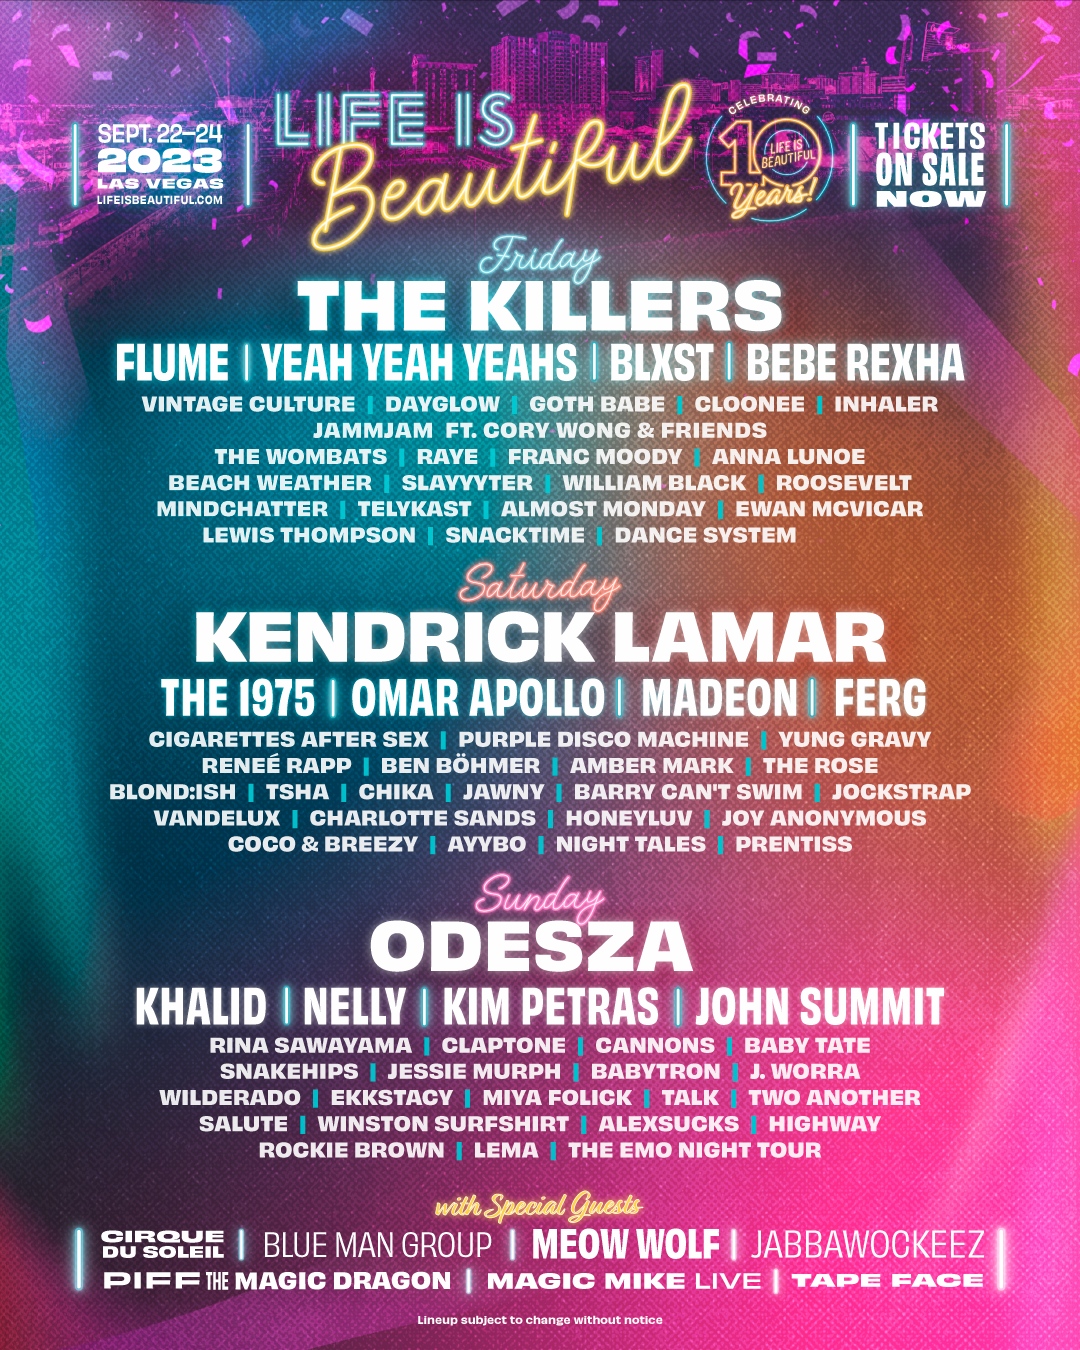 Life Is Beautiful 2023 lineup poster